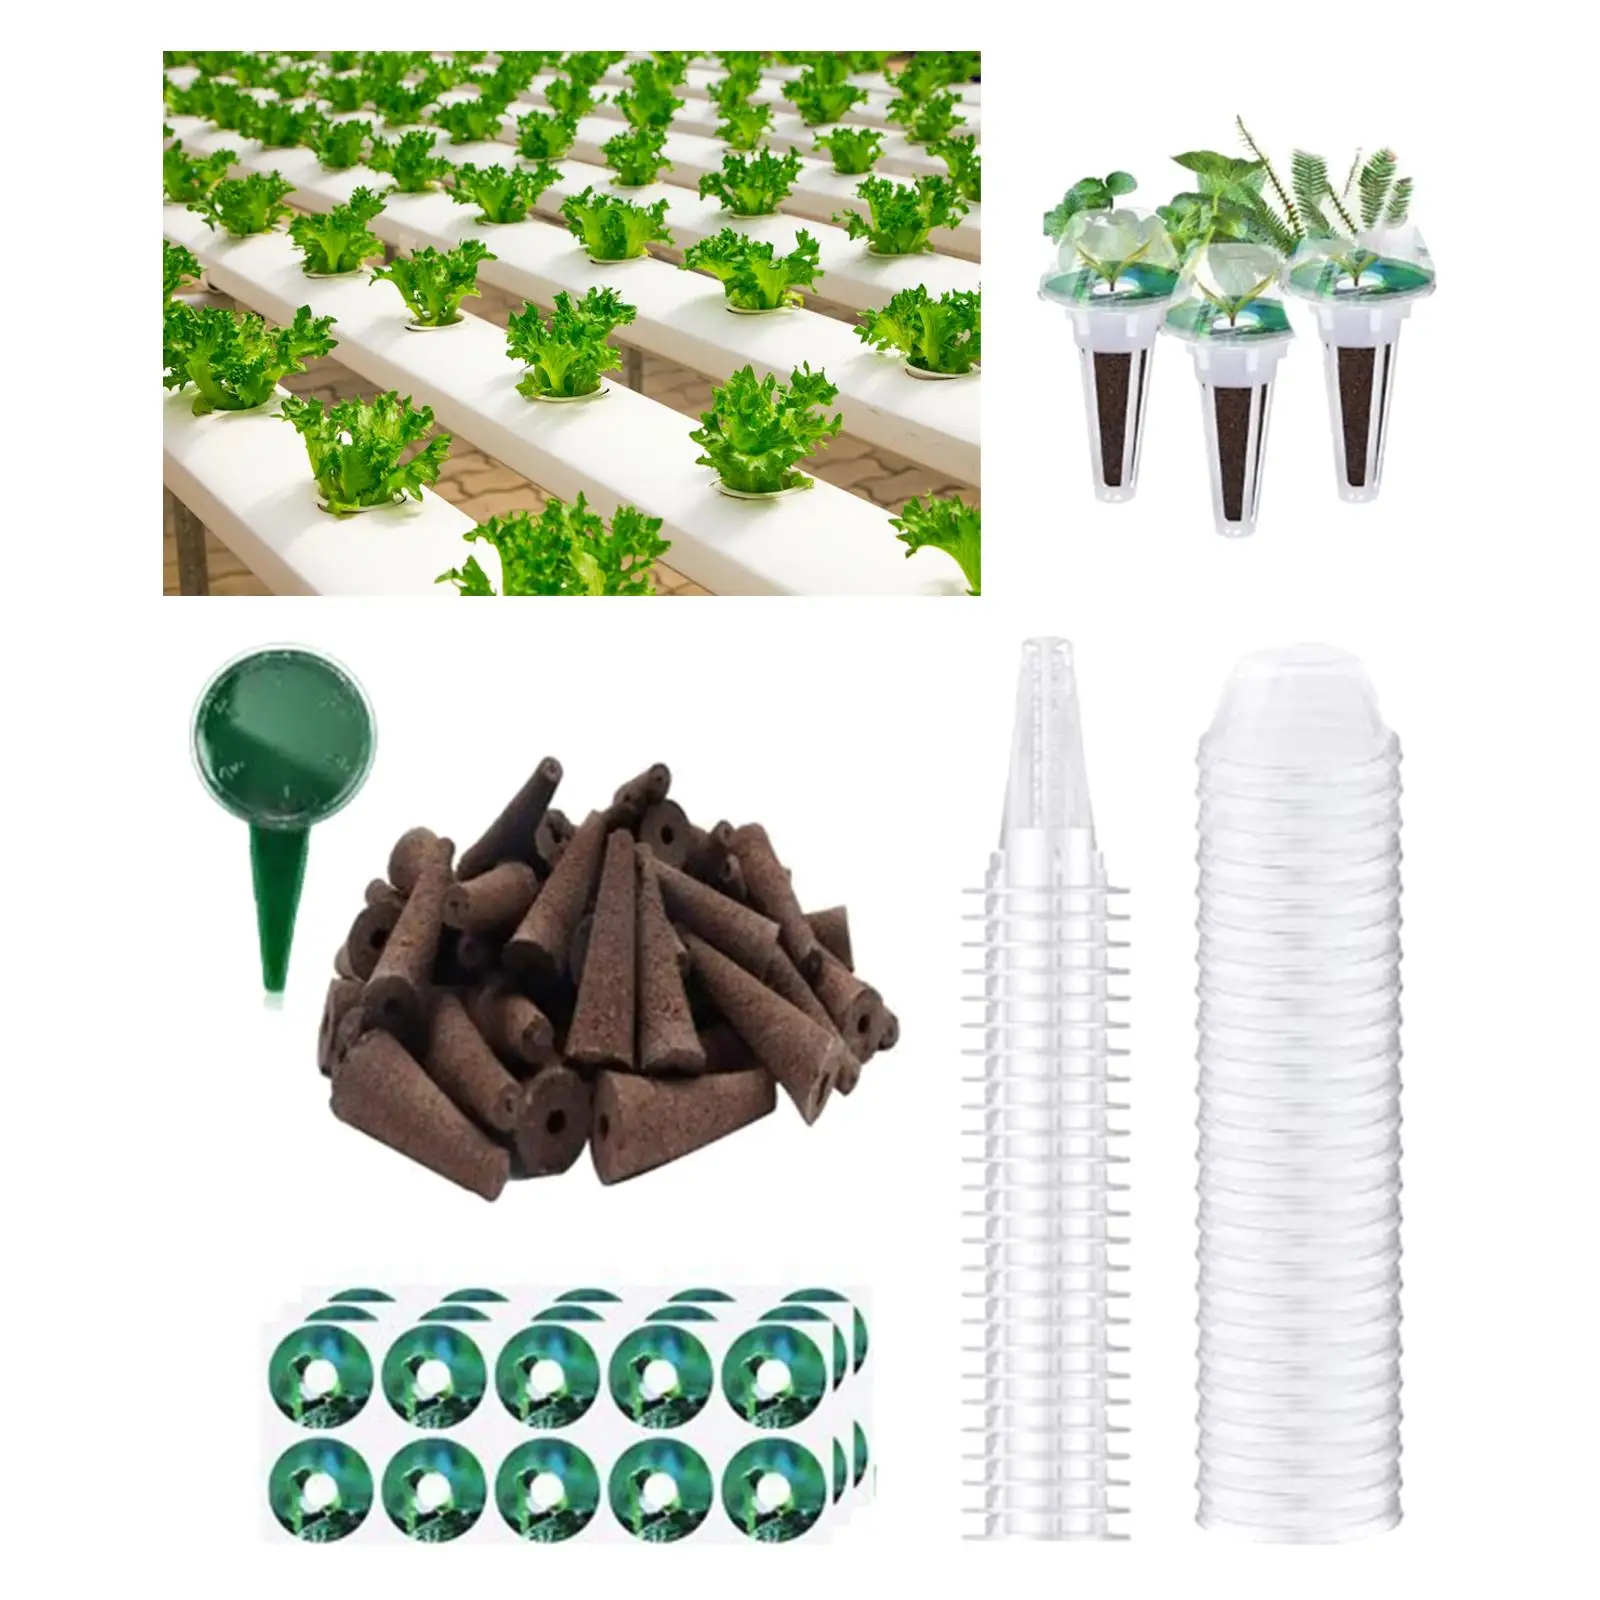 Nursery Pots Growing 24 Piece Set for Hydroponics Orchids Water Plant Grass Cultivate